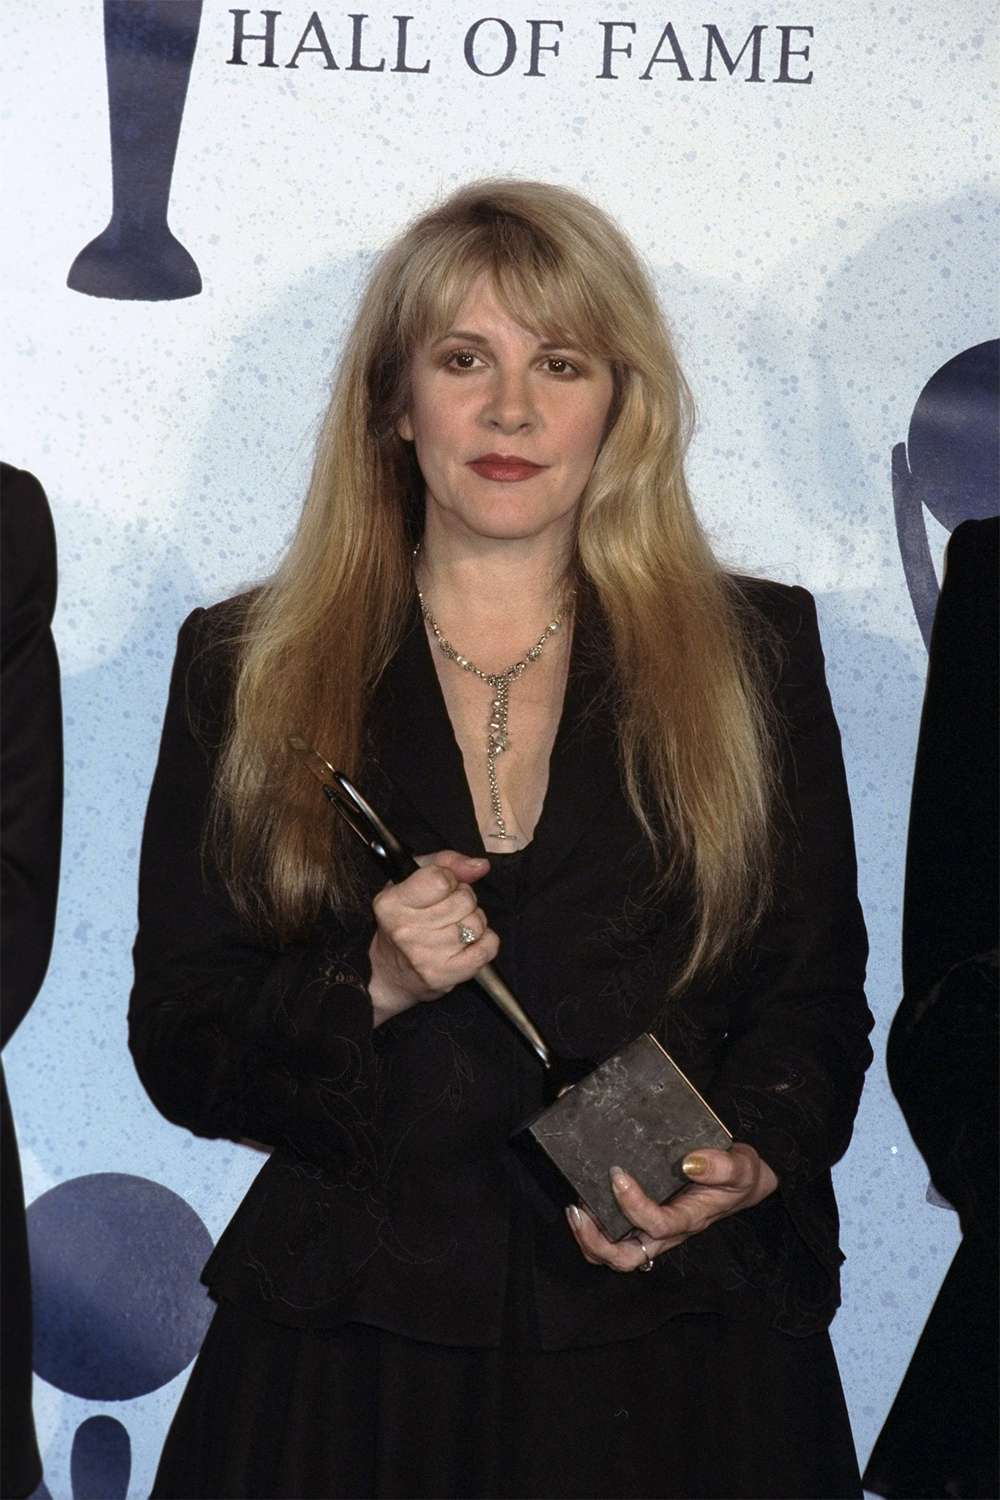 Stevie Nicks of Fleetwood Mac holds her award during Rock n' Roll Hall of Fame ceremony at the Waldorf-Astoria.